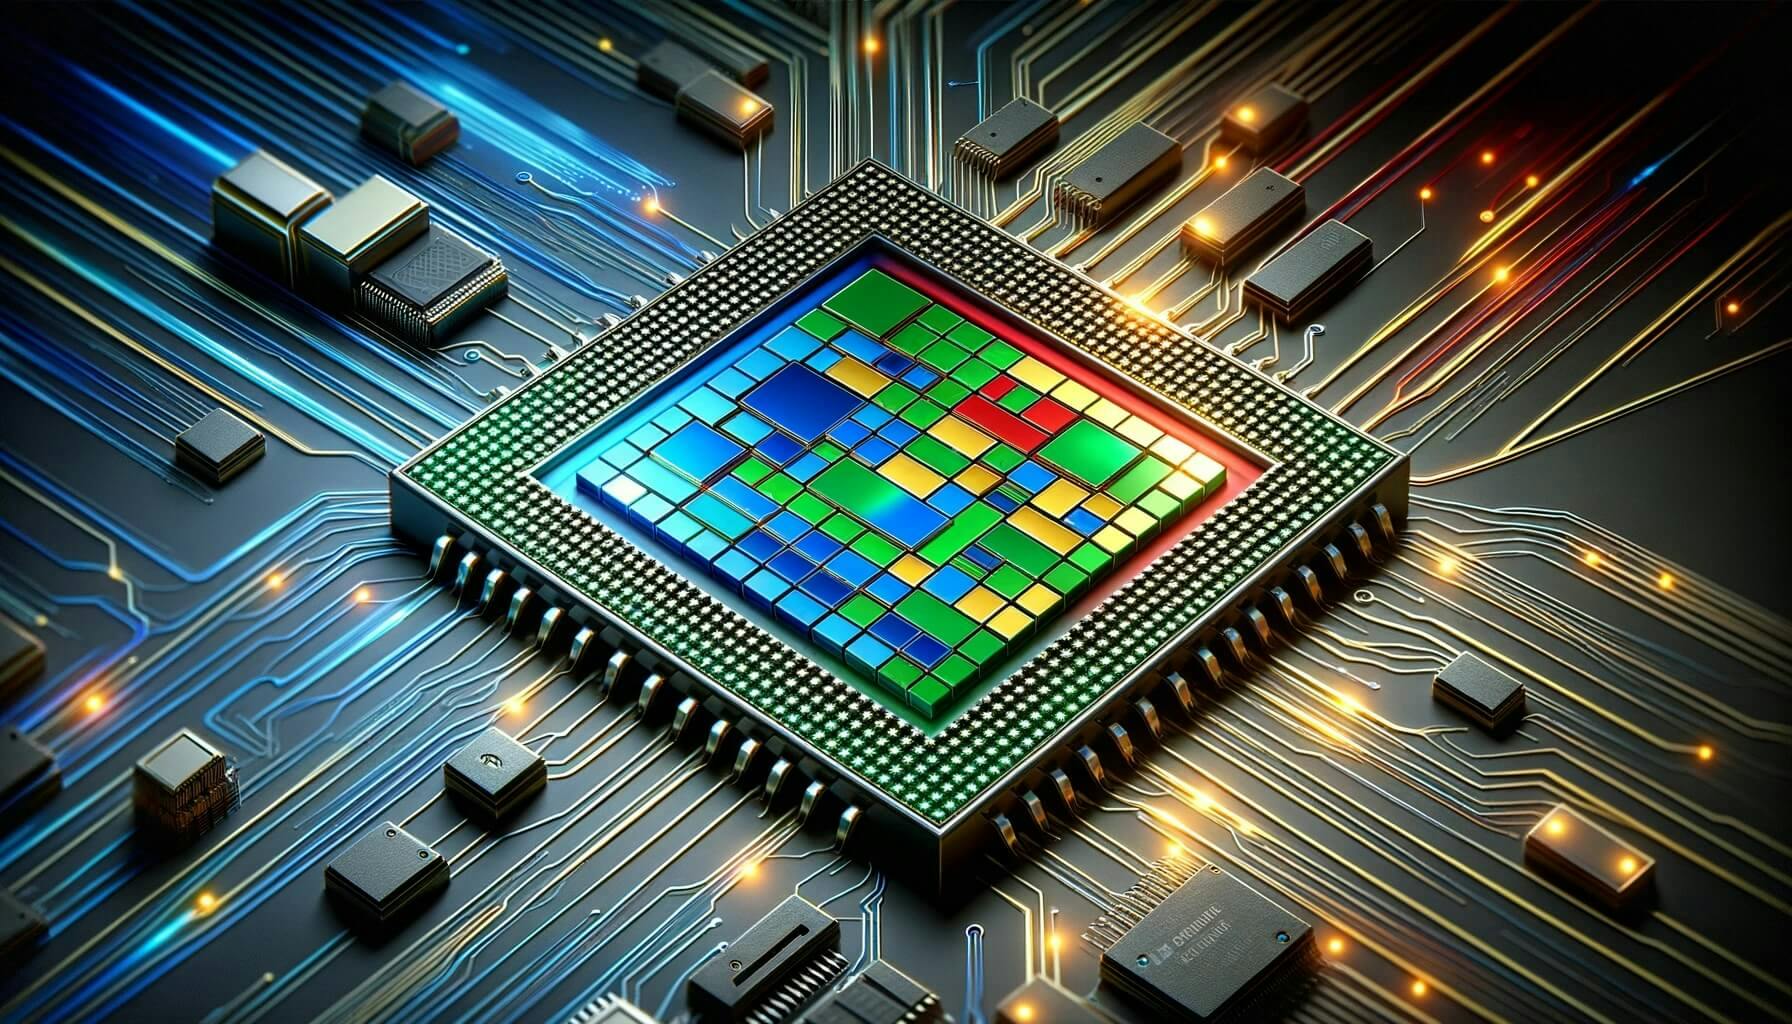 Microsoft unveils new AI chip 'Maia' in collaboration with OpenAI